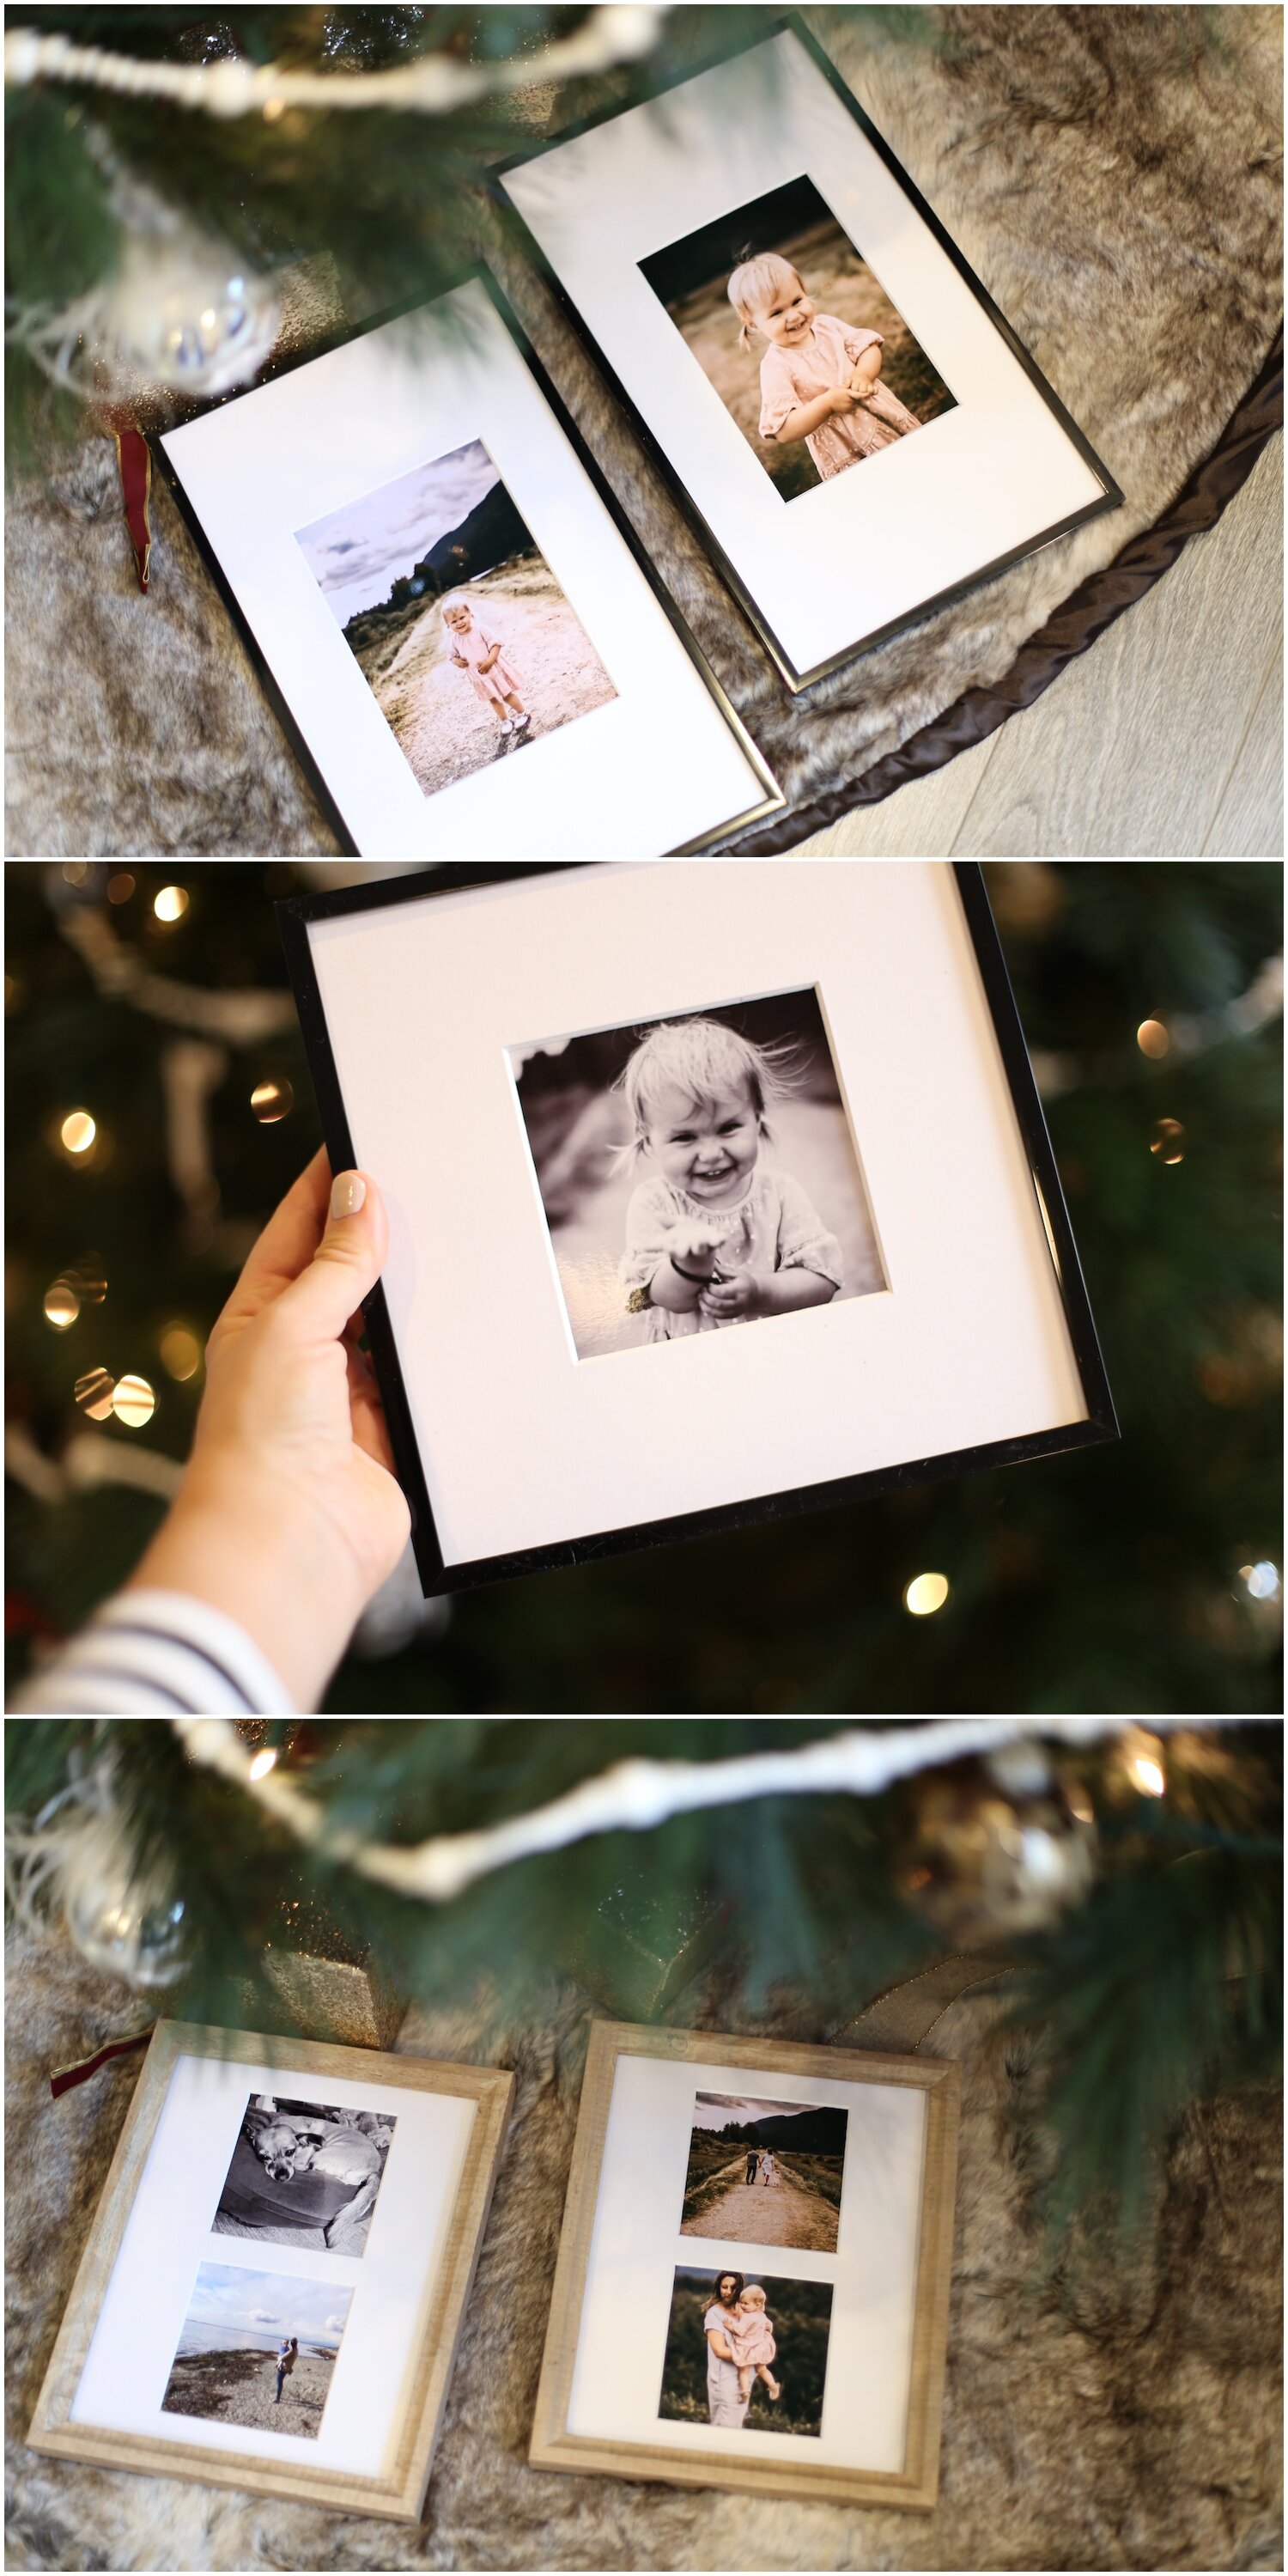 HOW TO ASSEMBLE LARGE MAT OFFSET PICTURE FRAMES - The Wellthy Mama